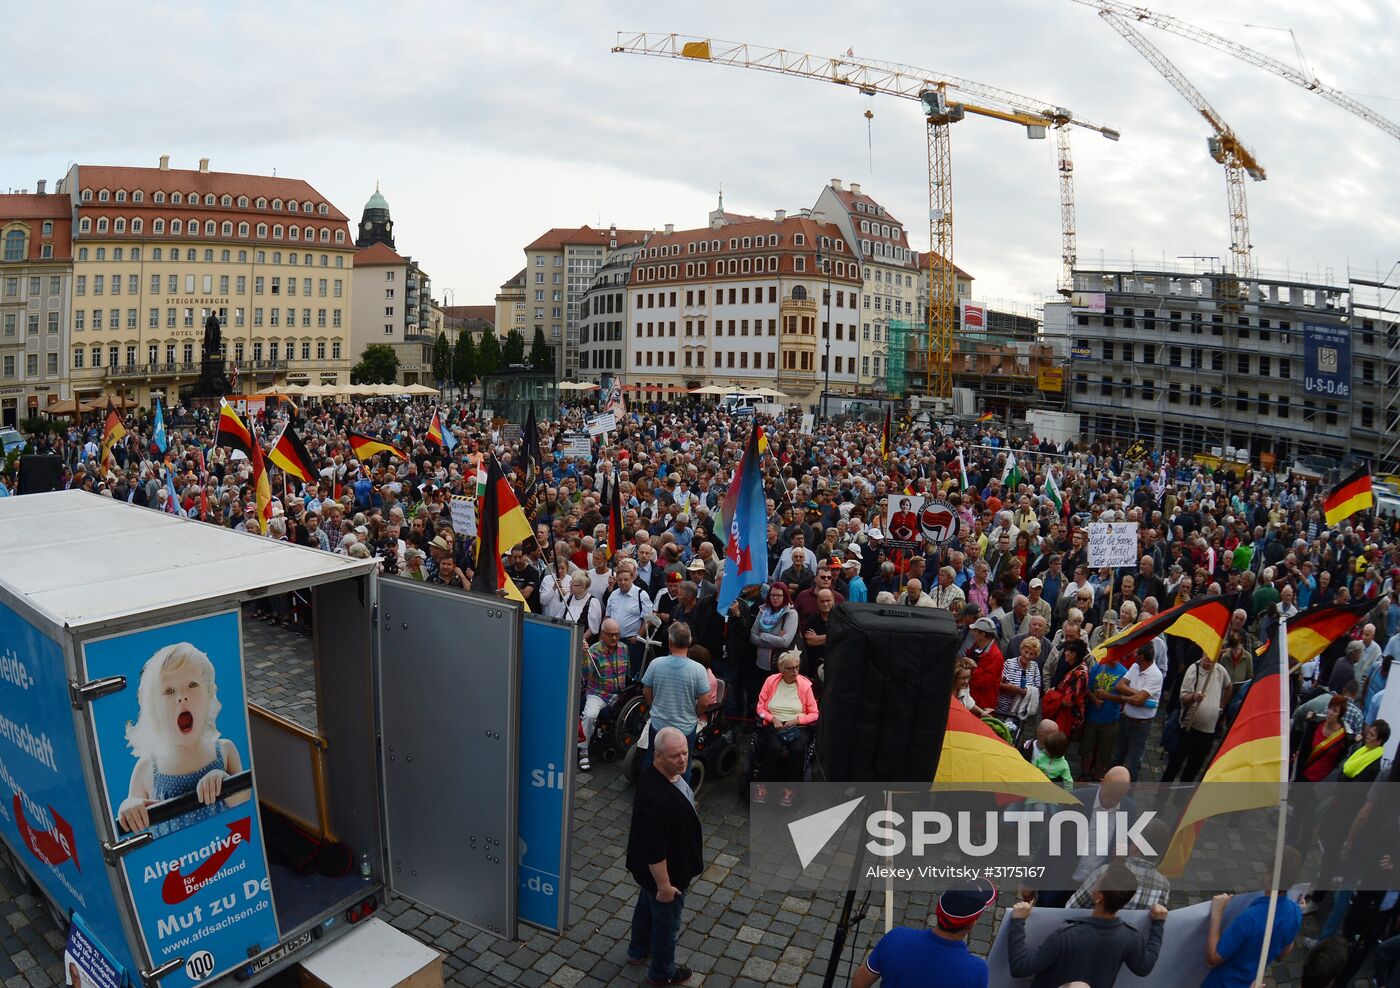 Alternative for Germany movement stages rally against Angela Merkel